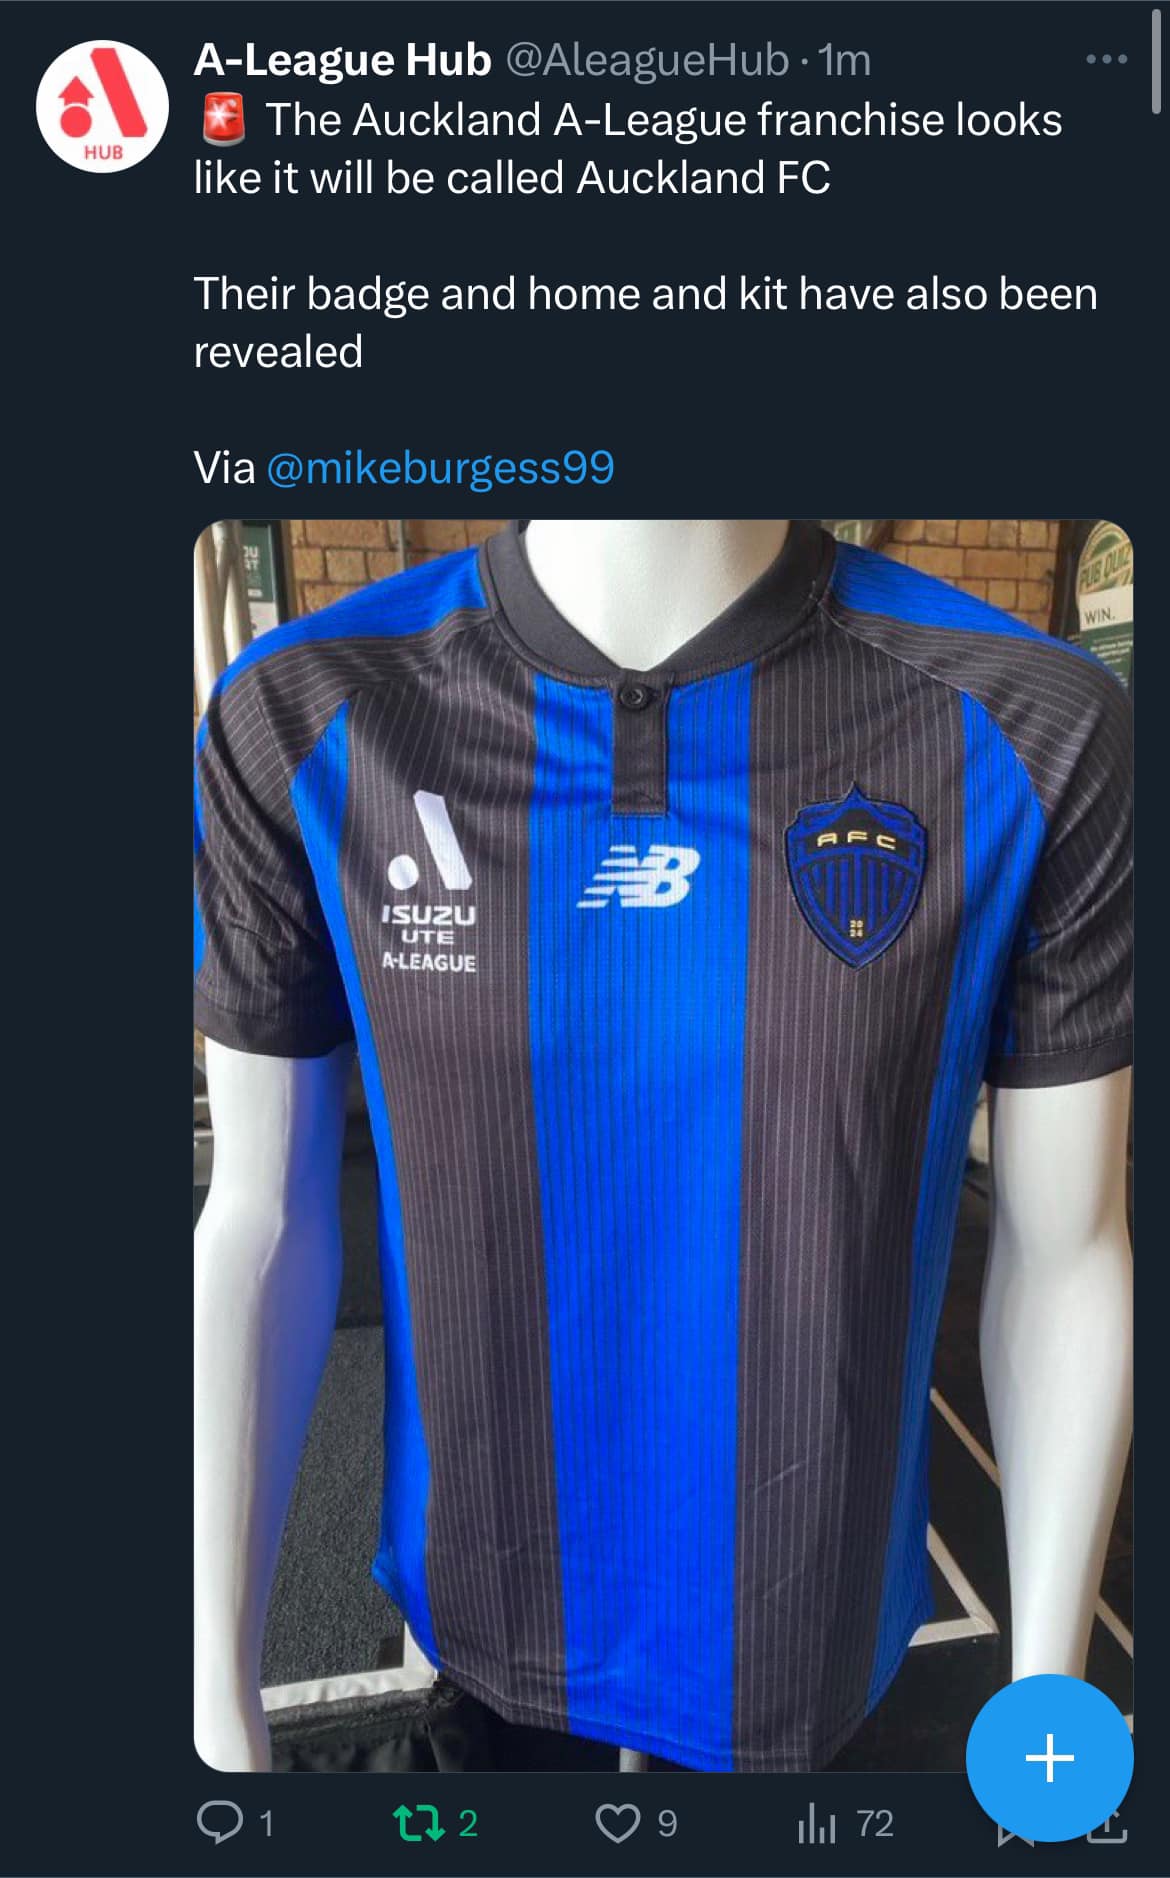 May be an image of soccer and text that says 'HUB A-League Hub @AleagueHub 1m The Auckland A-League franchise looks like it will be called Auckland FC Their badge and home and kit have also been revealed Via mikeburgess99 WIN. AB ISUZU A-LEAGUE + × 72'